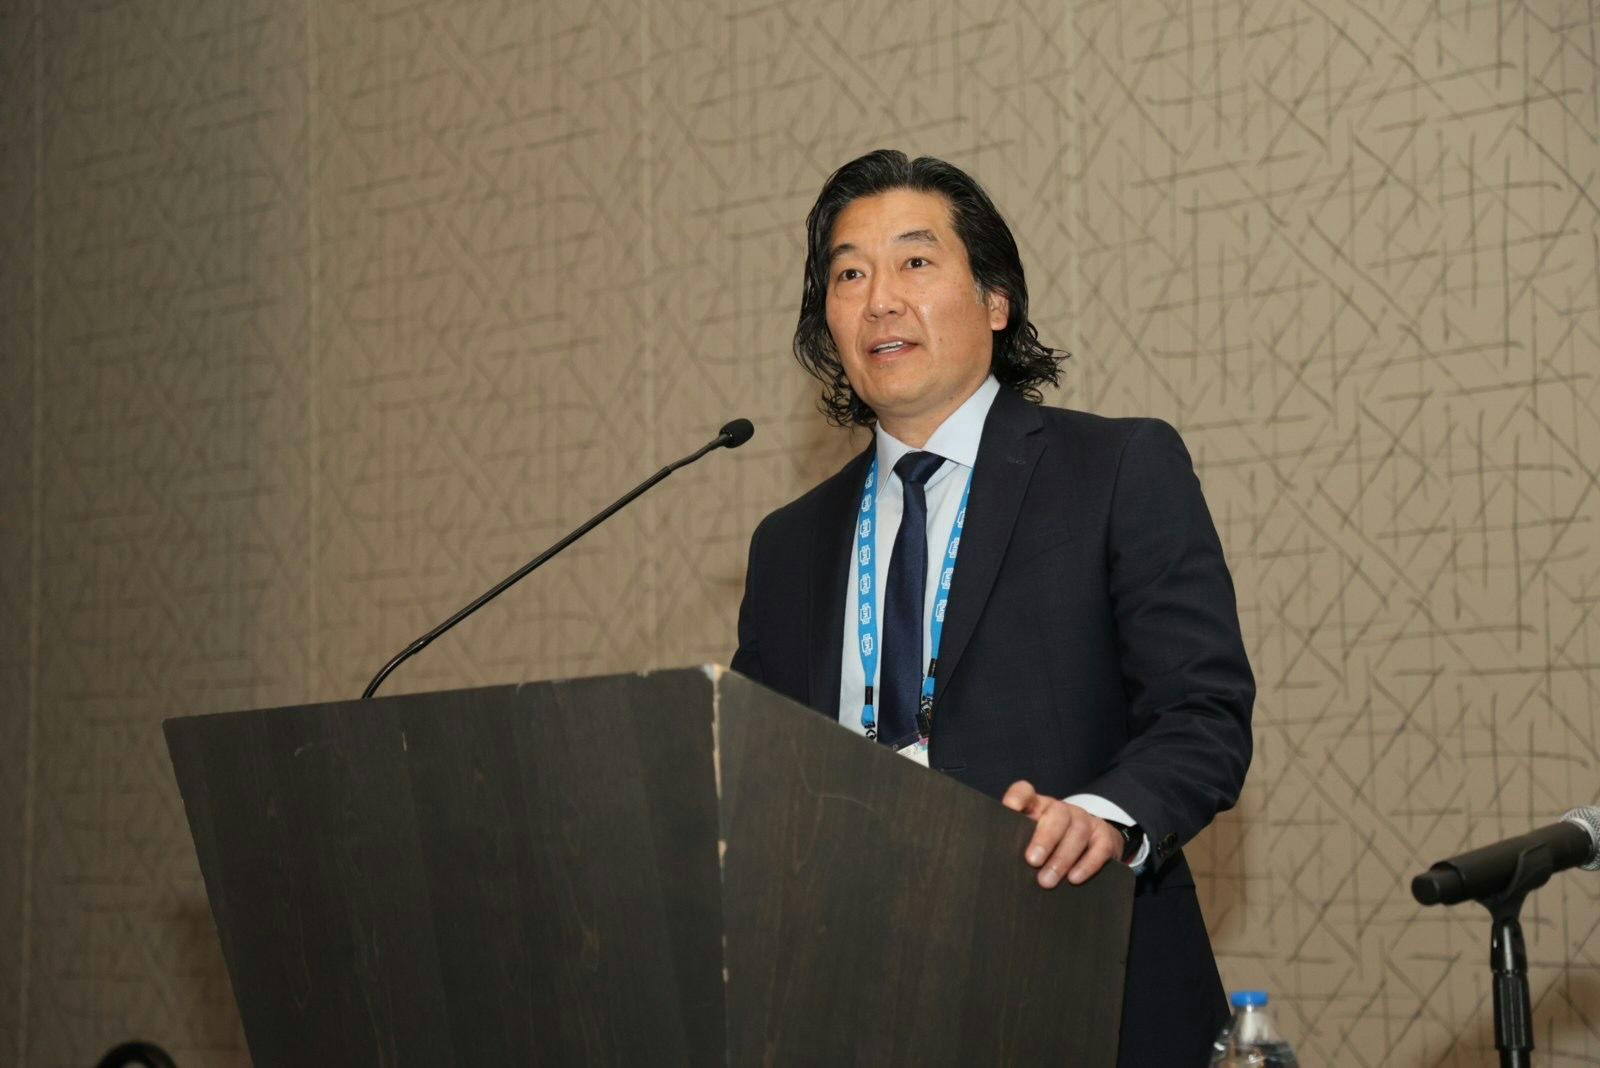 Darin Okuda, MD, FAAN, presents to the room of CMSC attendees in Aurora, Colorado.
Image courtesy: Shmulik Almany